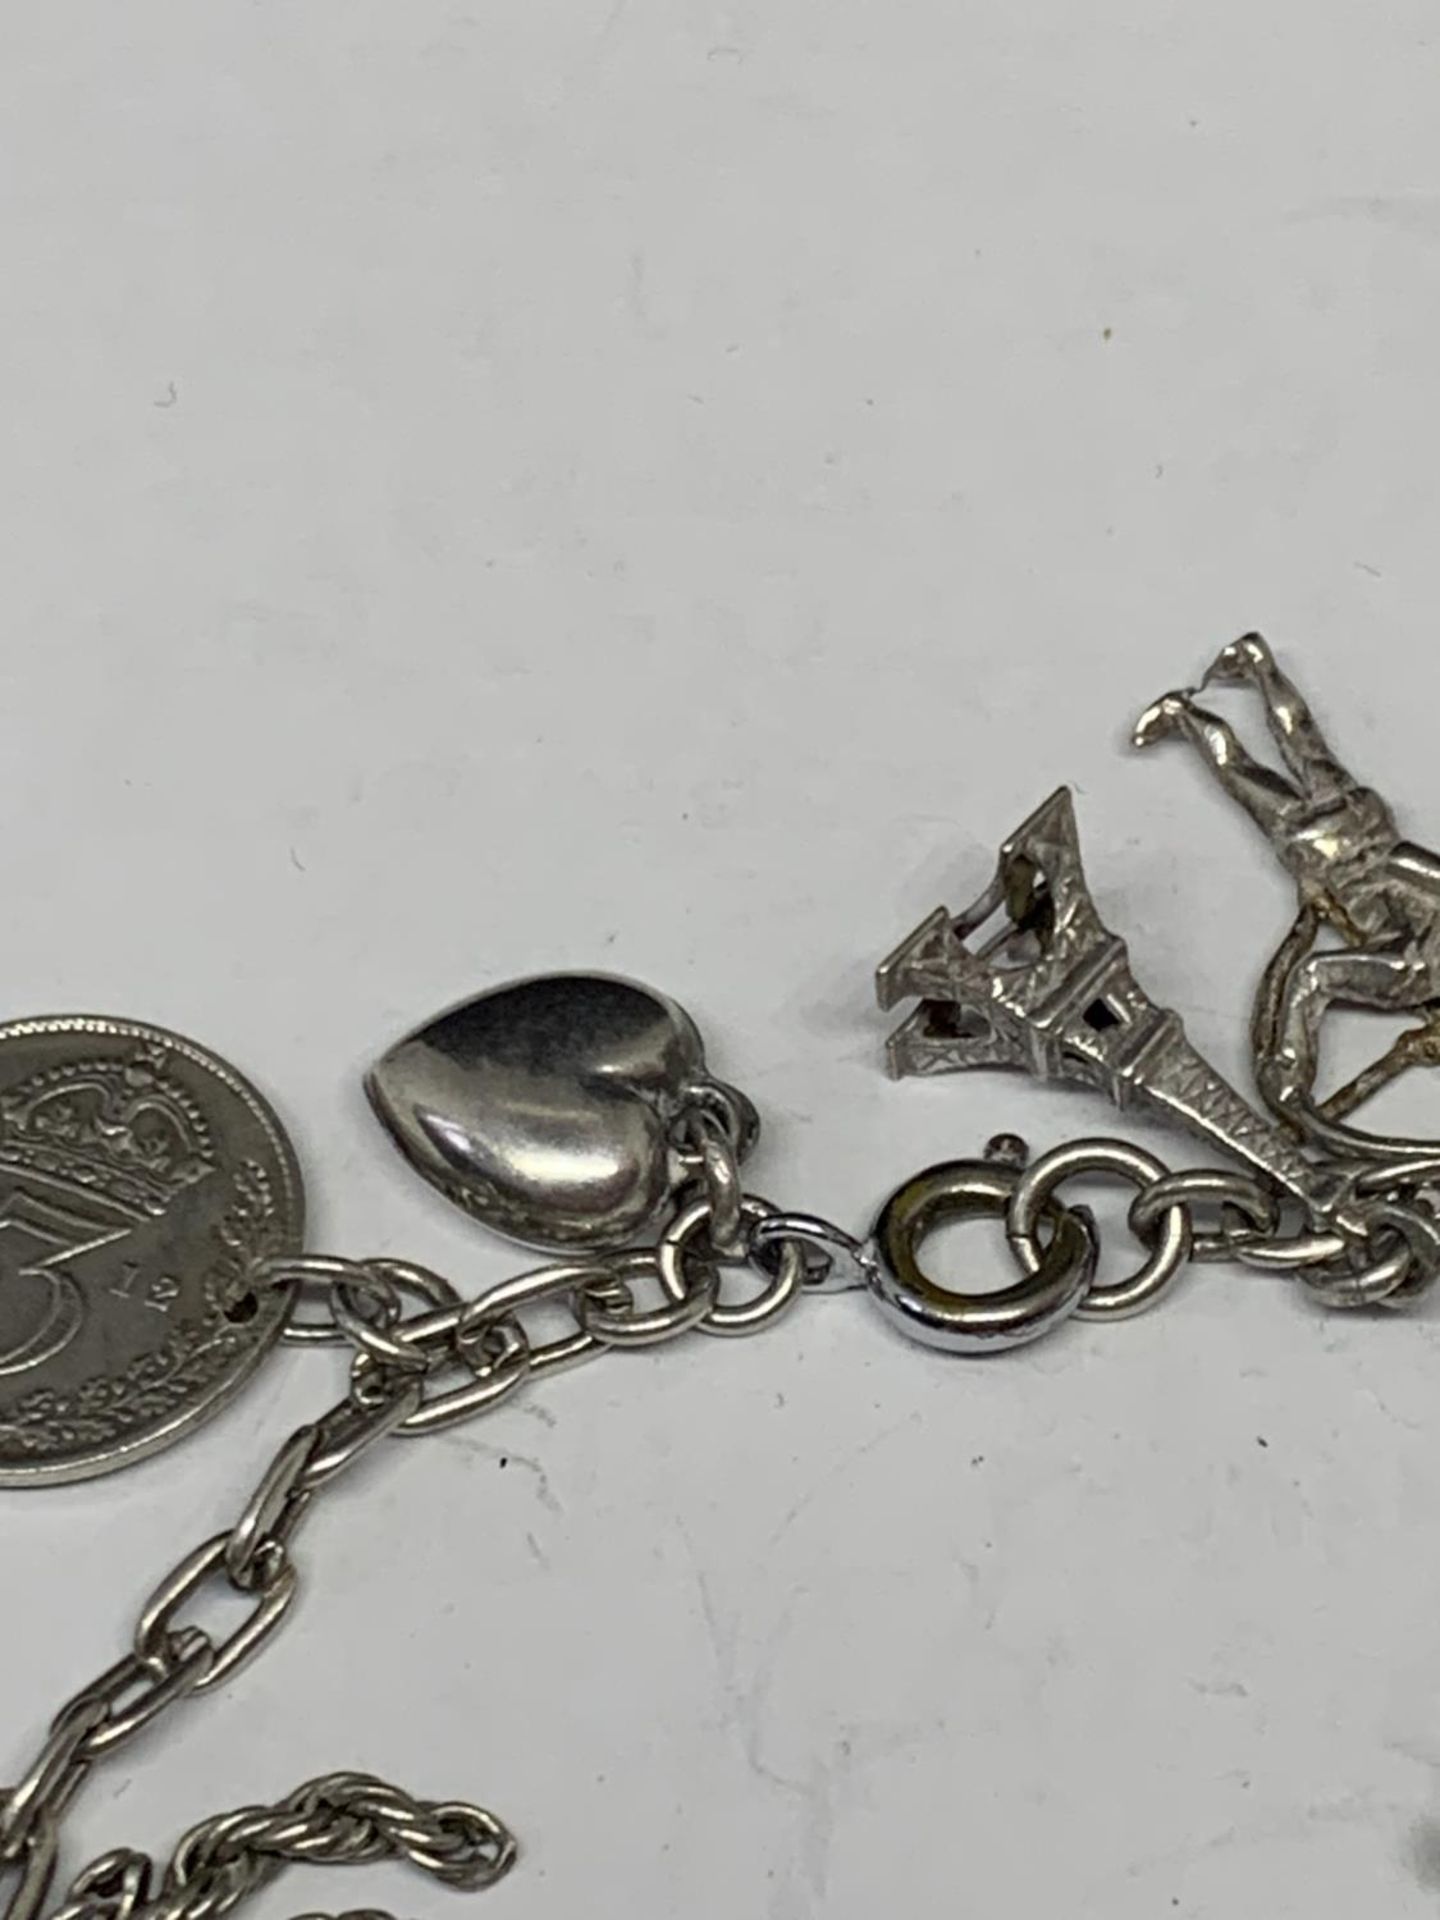 A SILVER CHARM BRACELET WITH NINETEEN CHARMS - Image 3 of 5